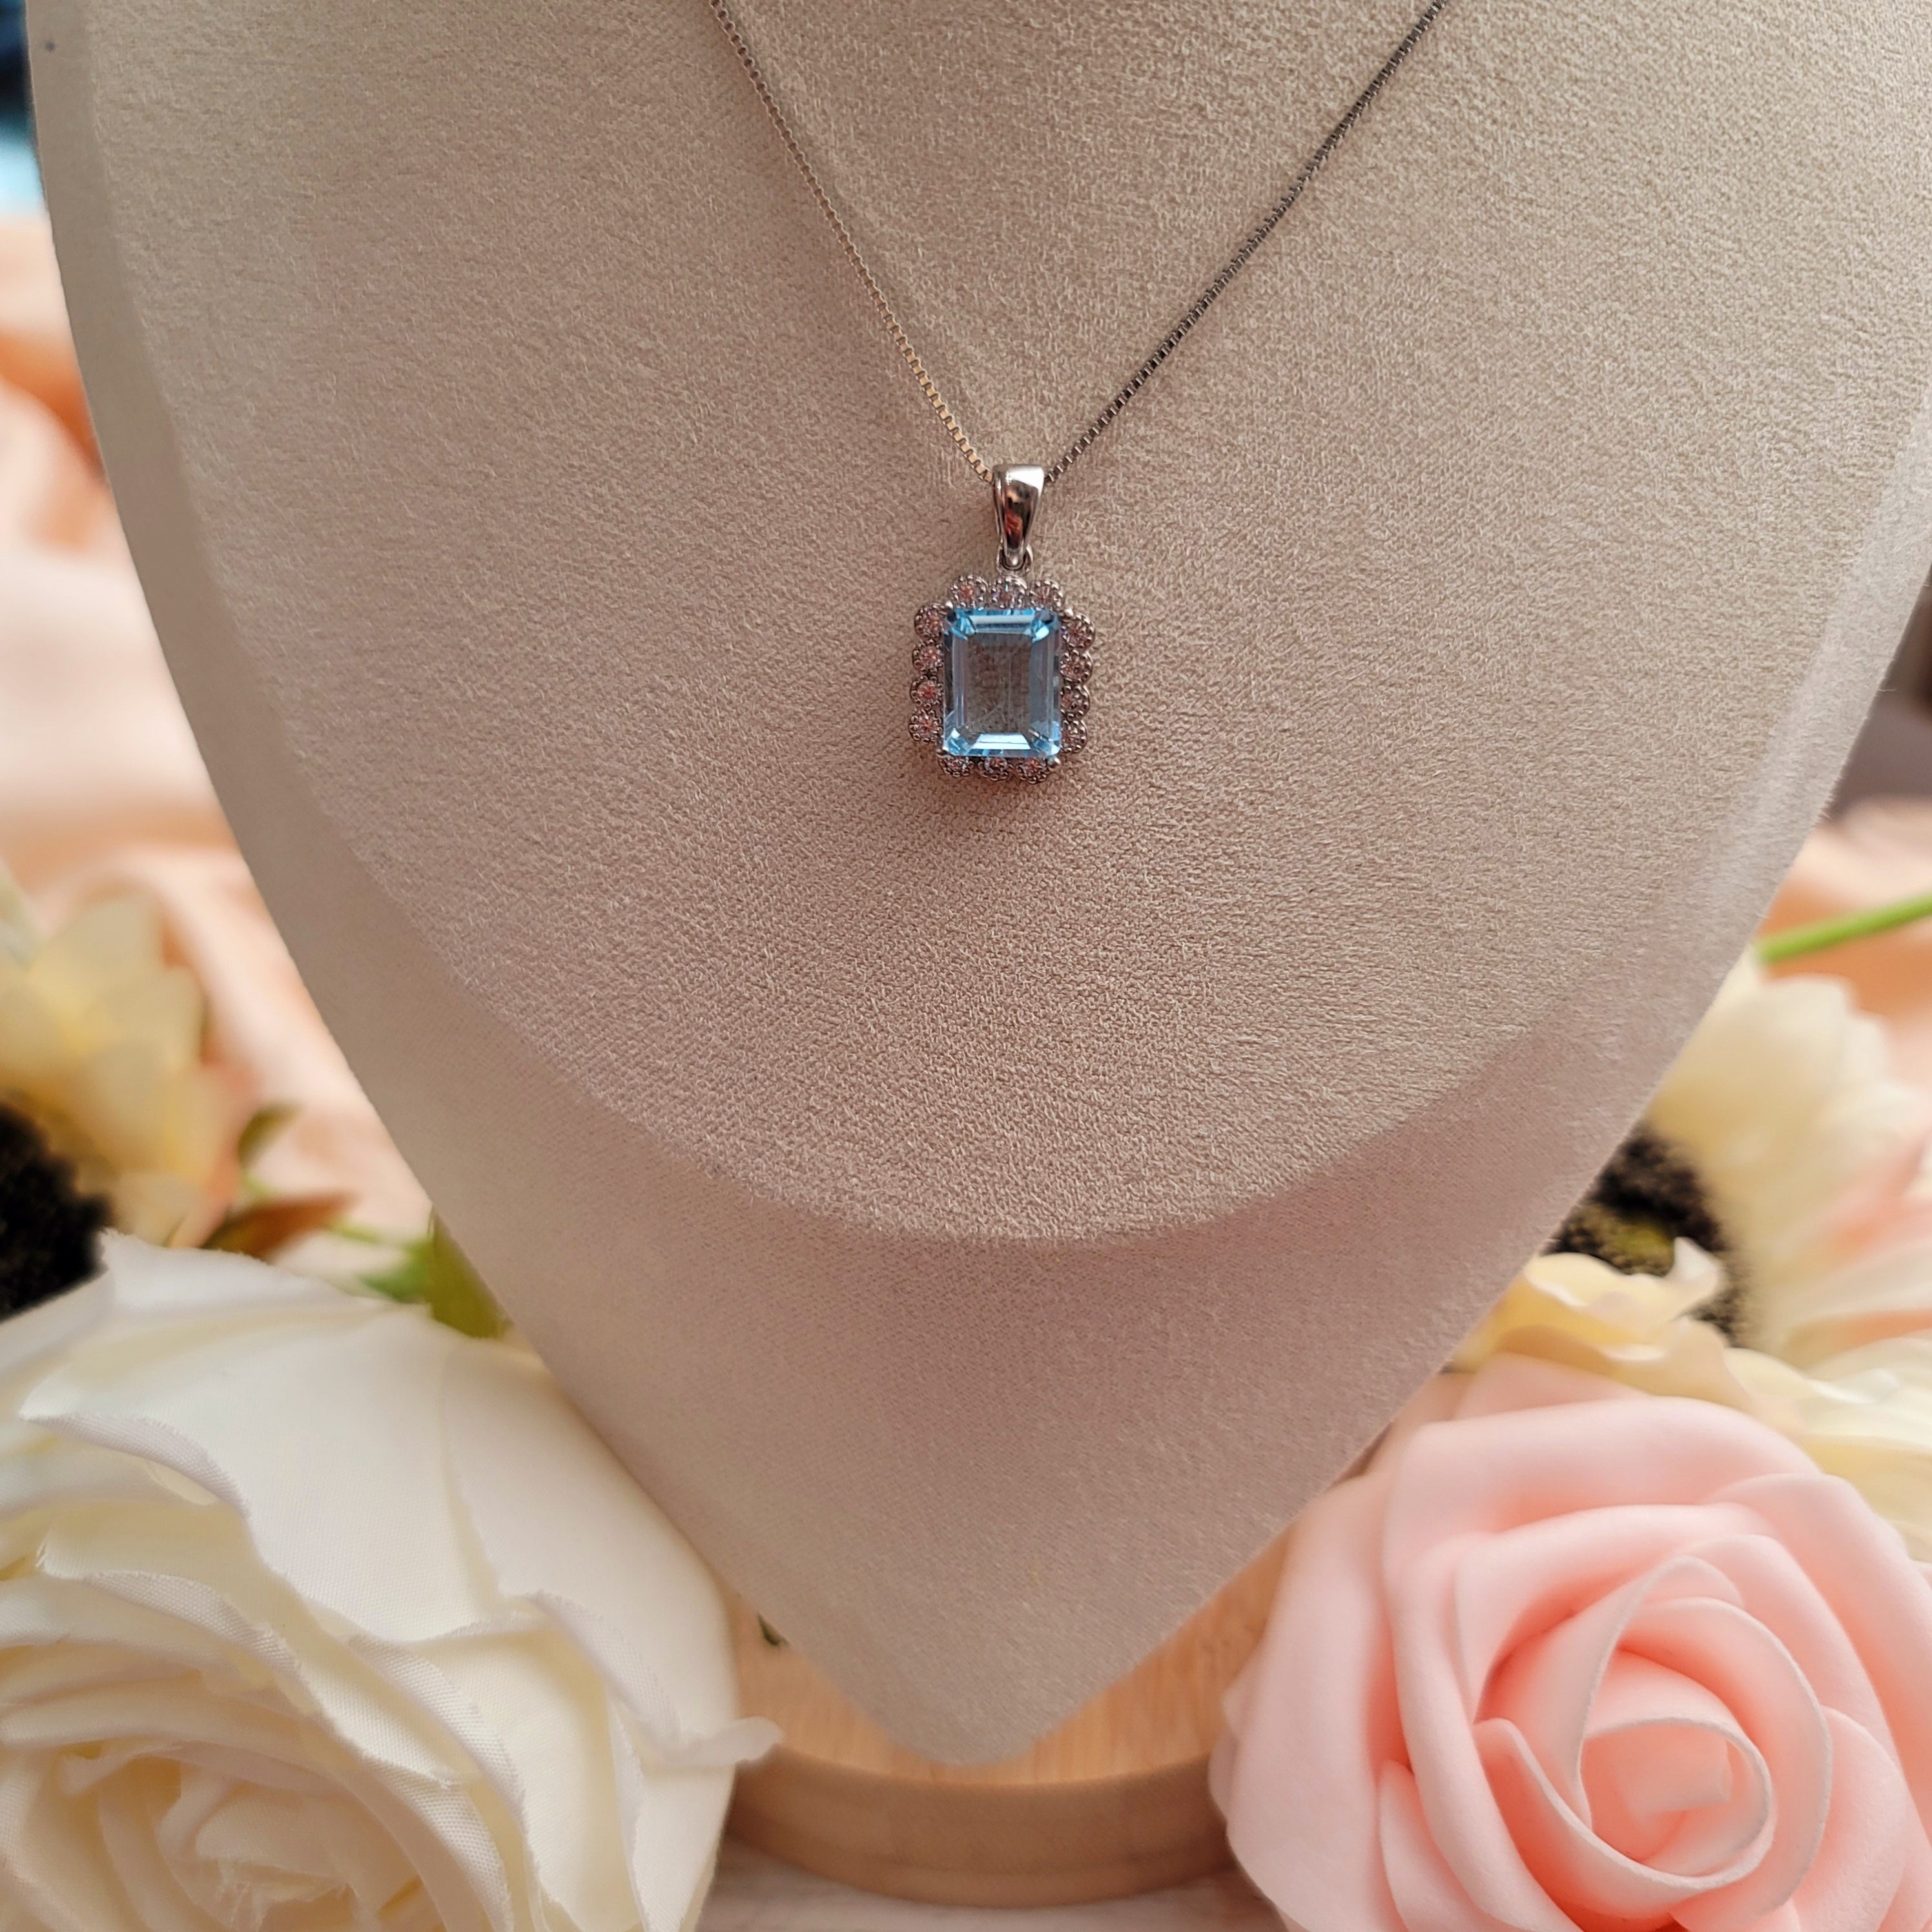 Blue Topaz Magestic Pendant for Awareness, Communication and Opportunities